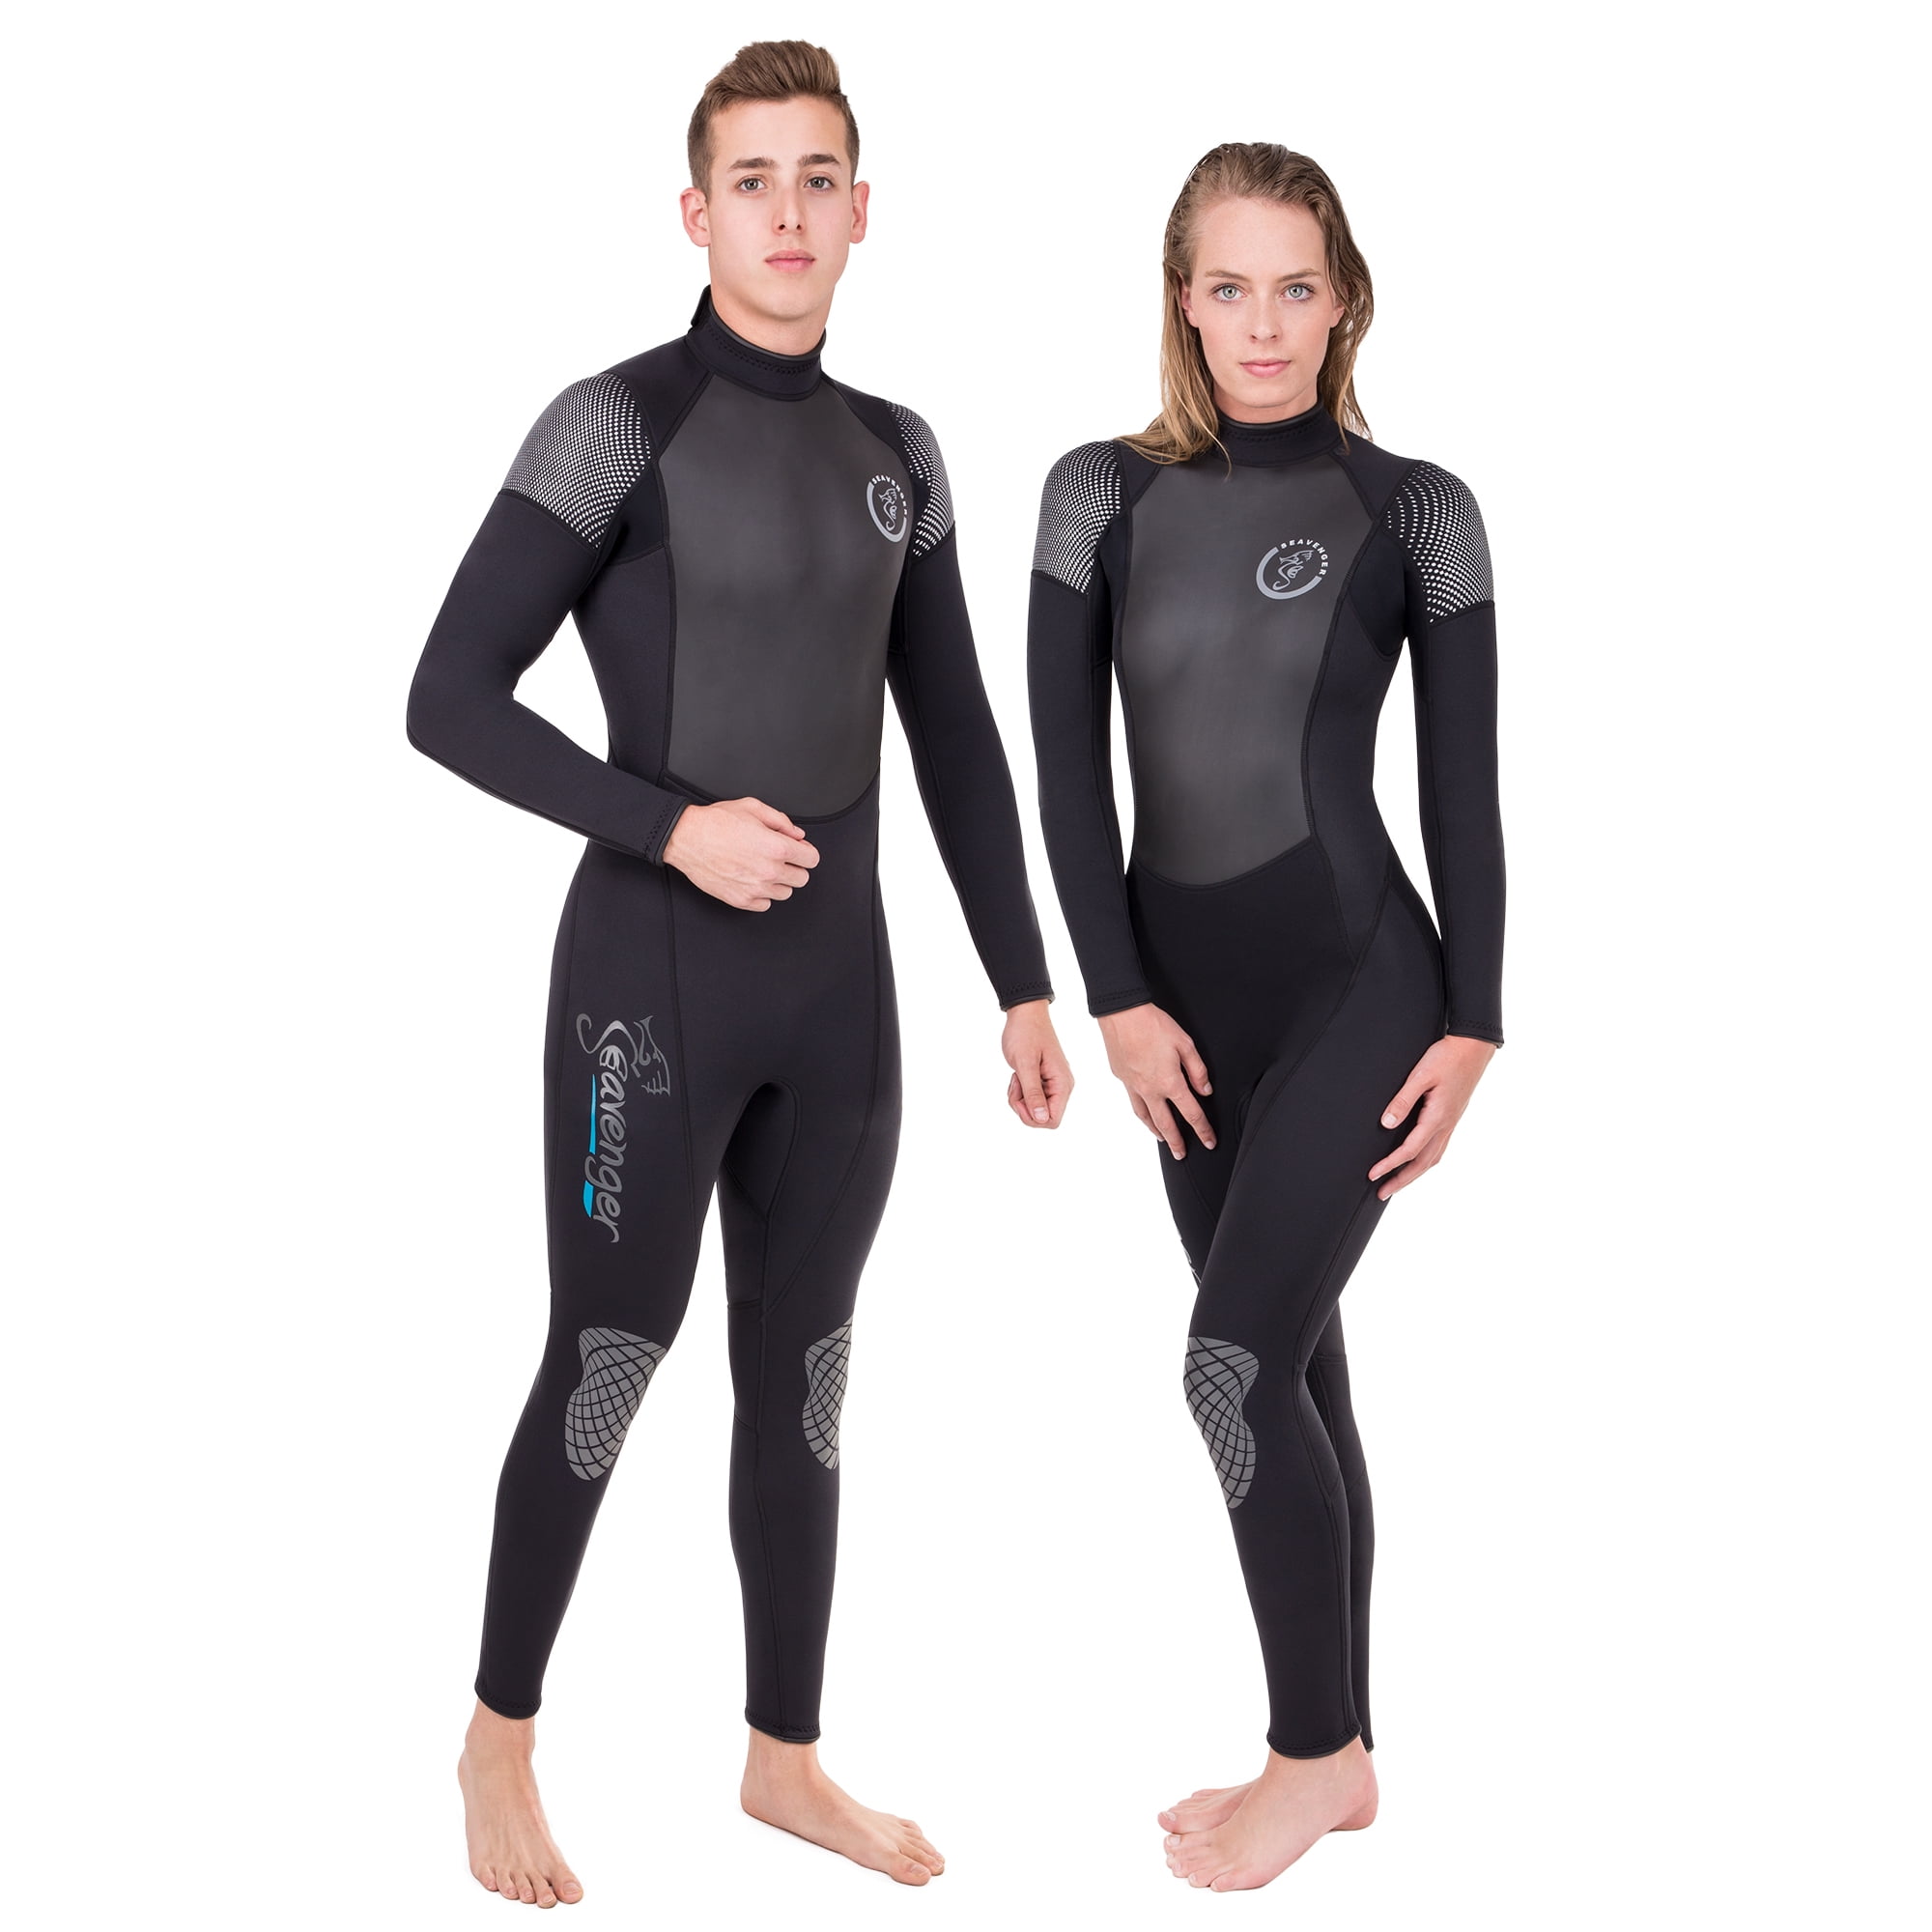 3MM Neoprene Wetsuit Swimming Surfing Diving Suit f Cold Water Scuba Snorkeling 